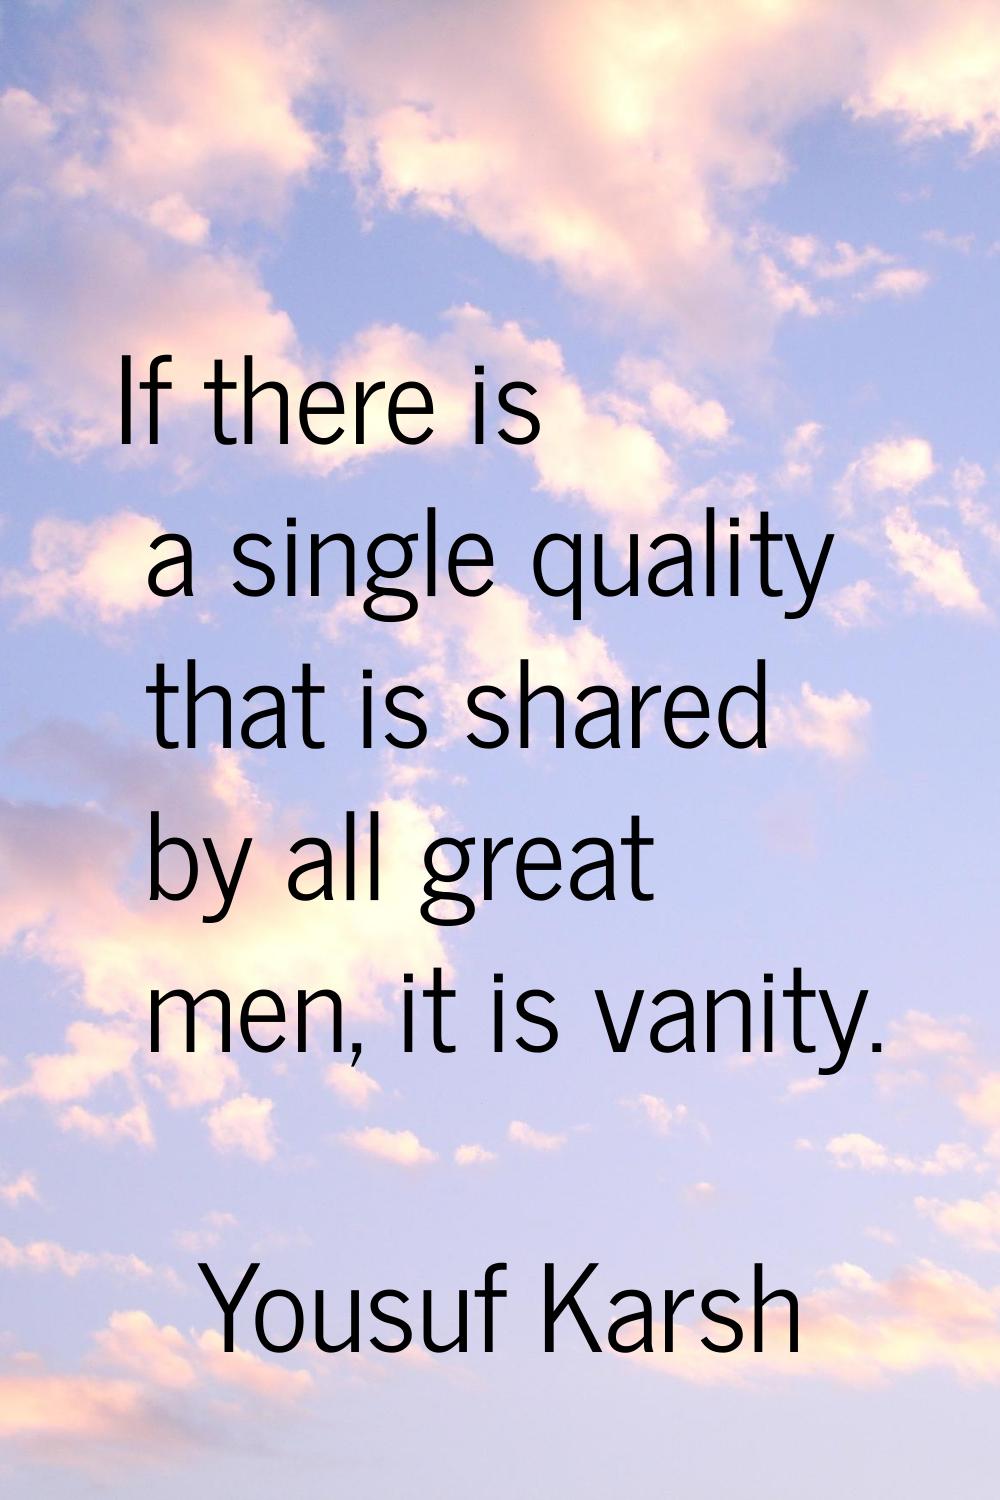 If there is a single quality that is shared by all great men, it is vanity.